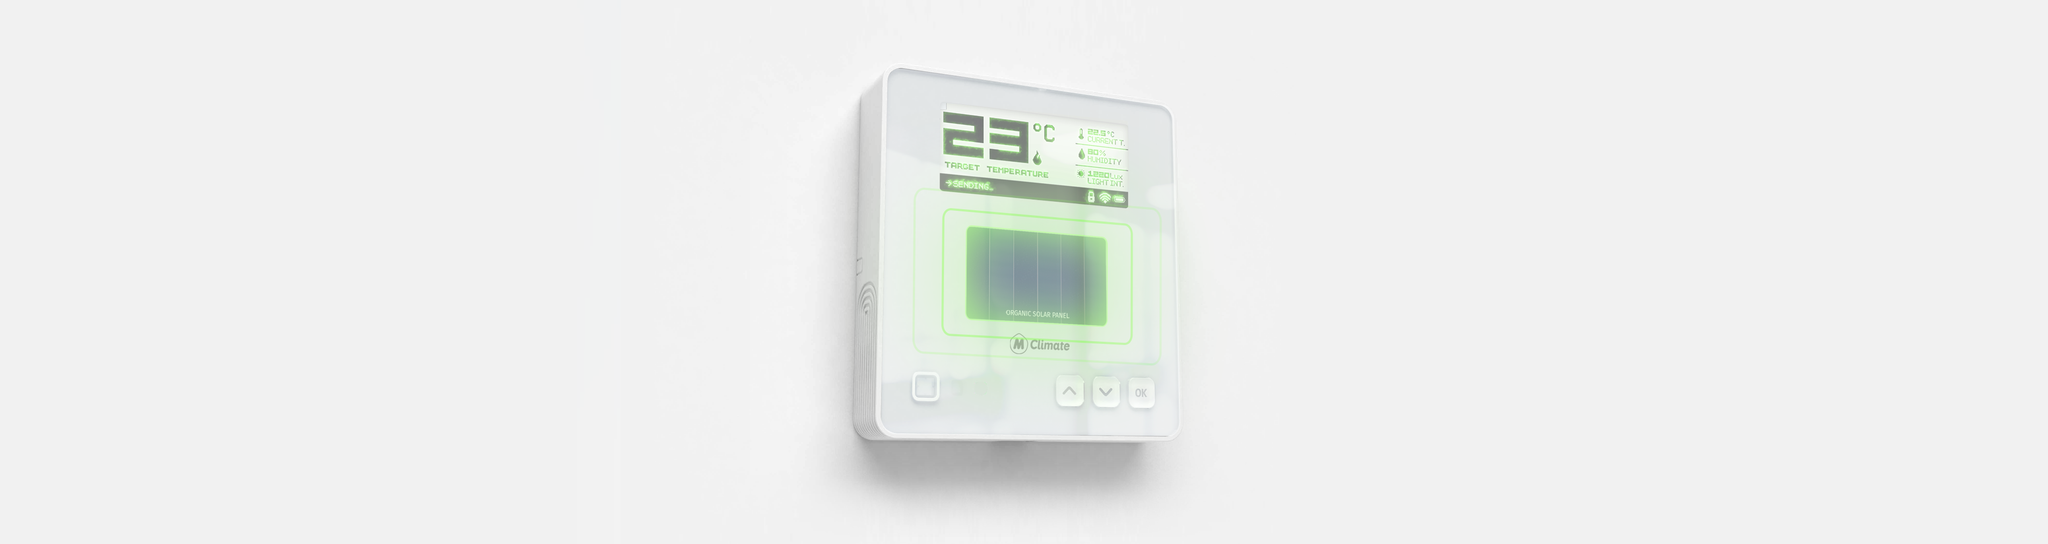 MClimate Releases Maintenance Free Wireless Thermostat Powered By Organic Indoor Solar Cells From Epishine and LoRaWAN®